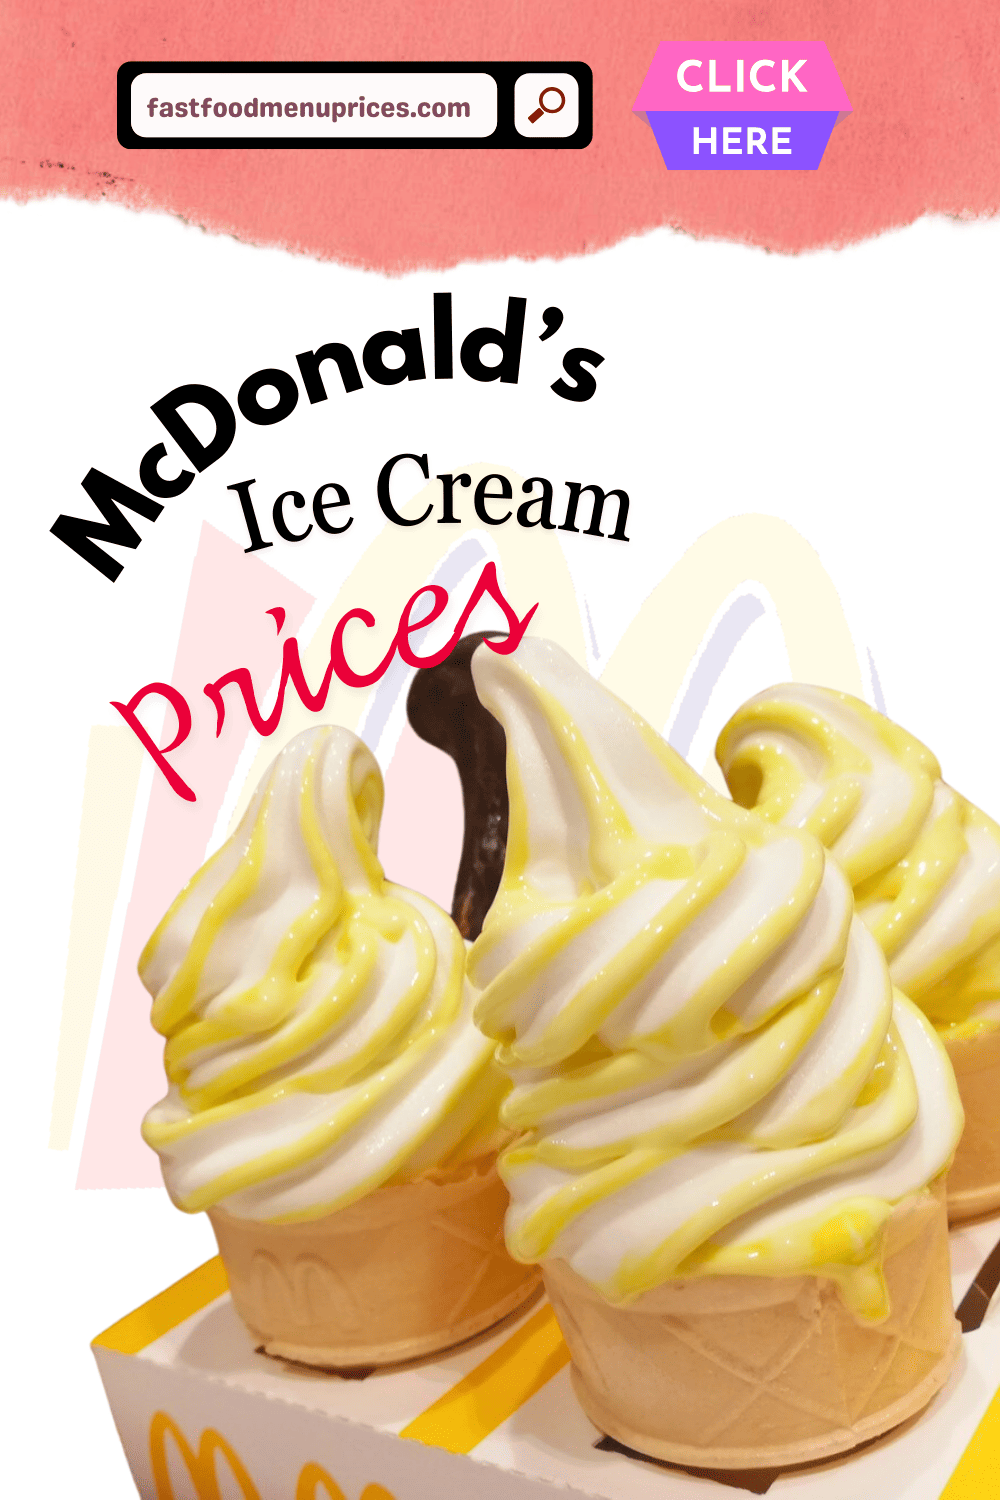 Discover the affordable prices of McDonald's ice cream.